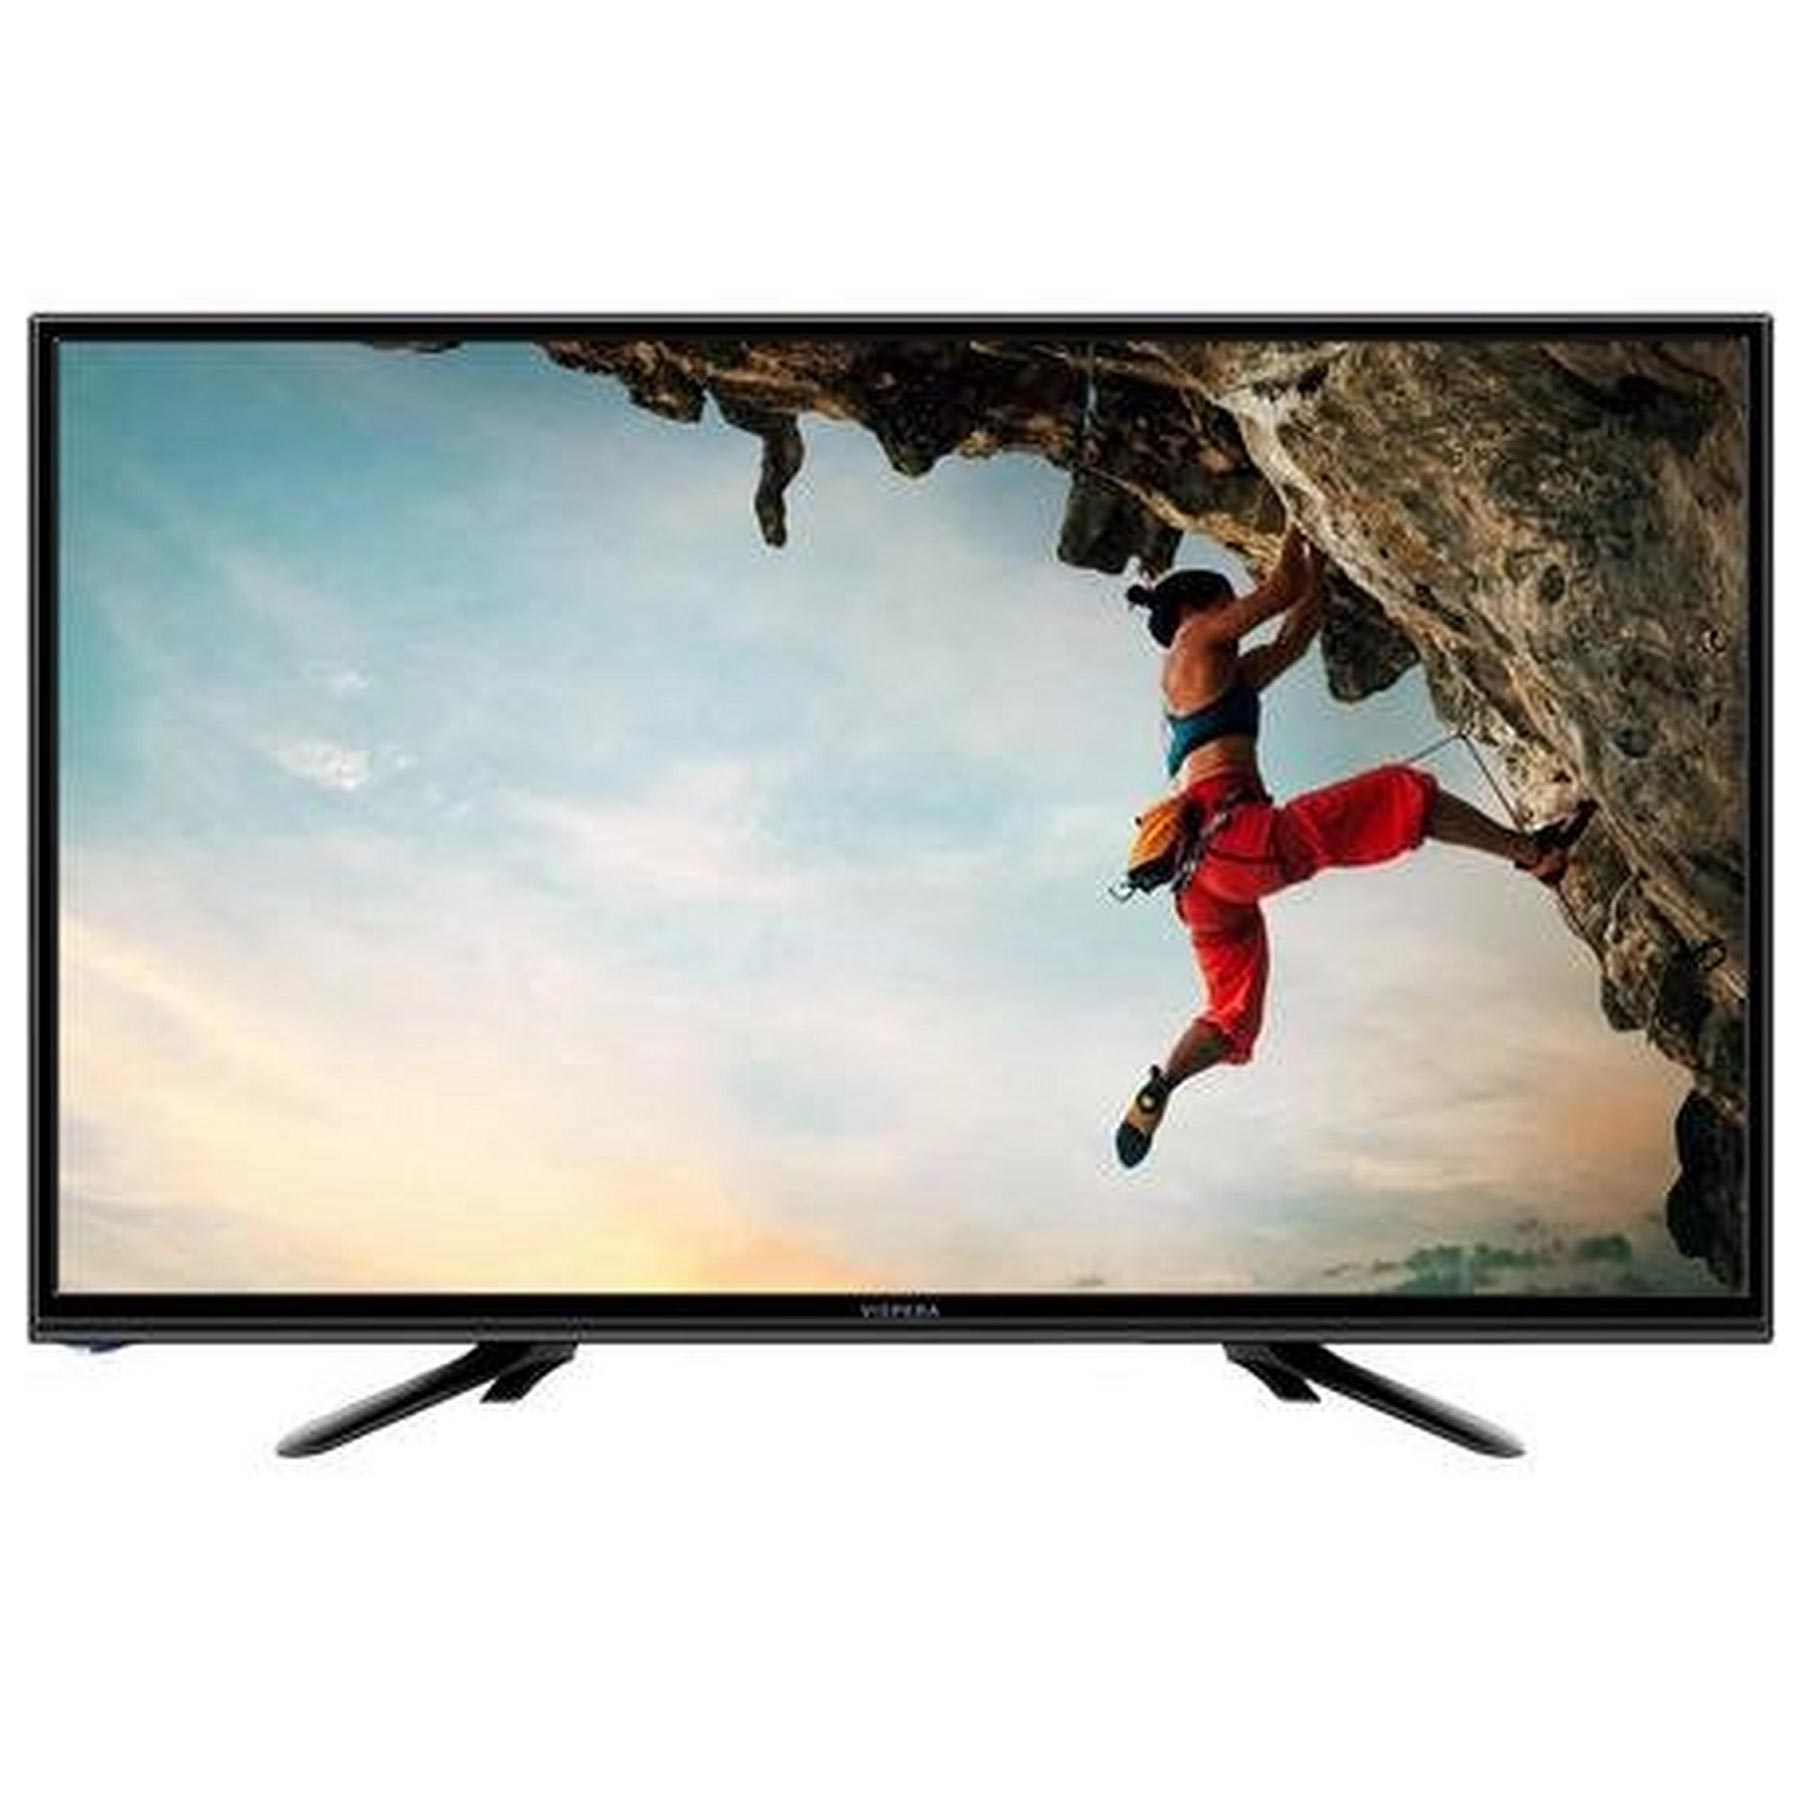 Image of Vispera 22SOLO1 22 HD Ready LED TV with Freeview HD in Black